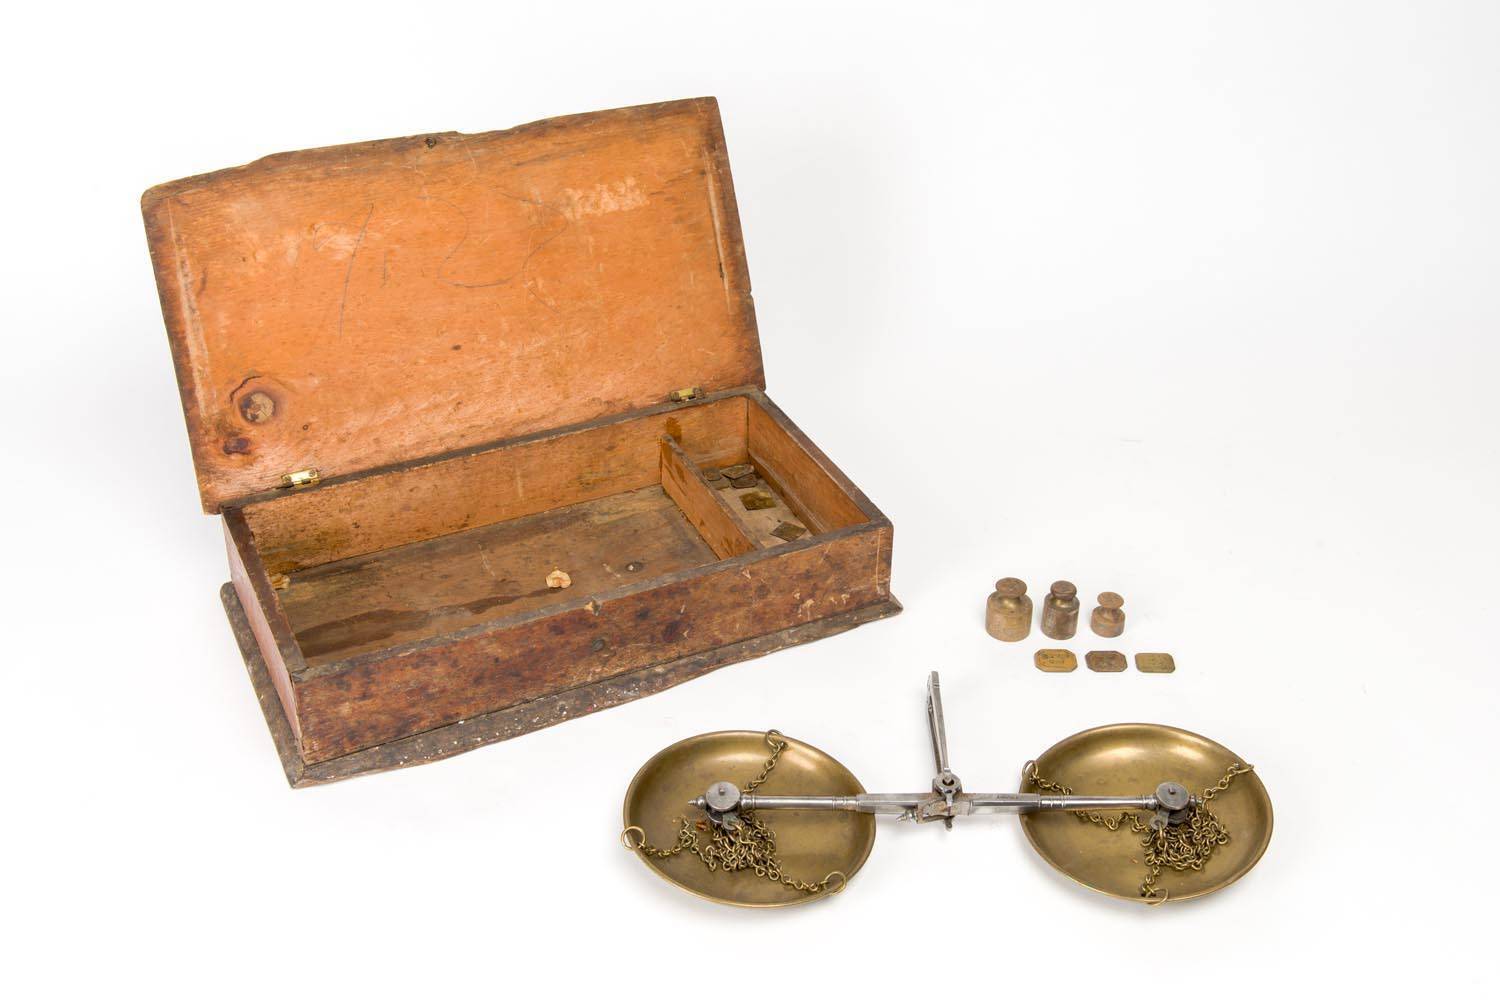 Gold miner's scales and assorted Troy weights in box